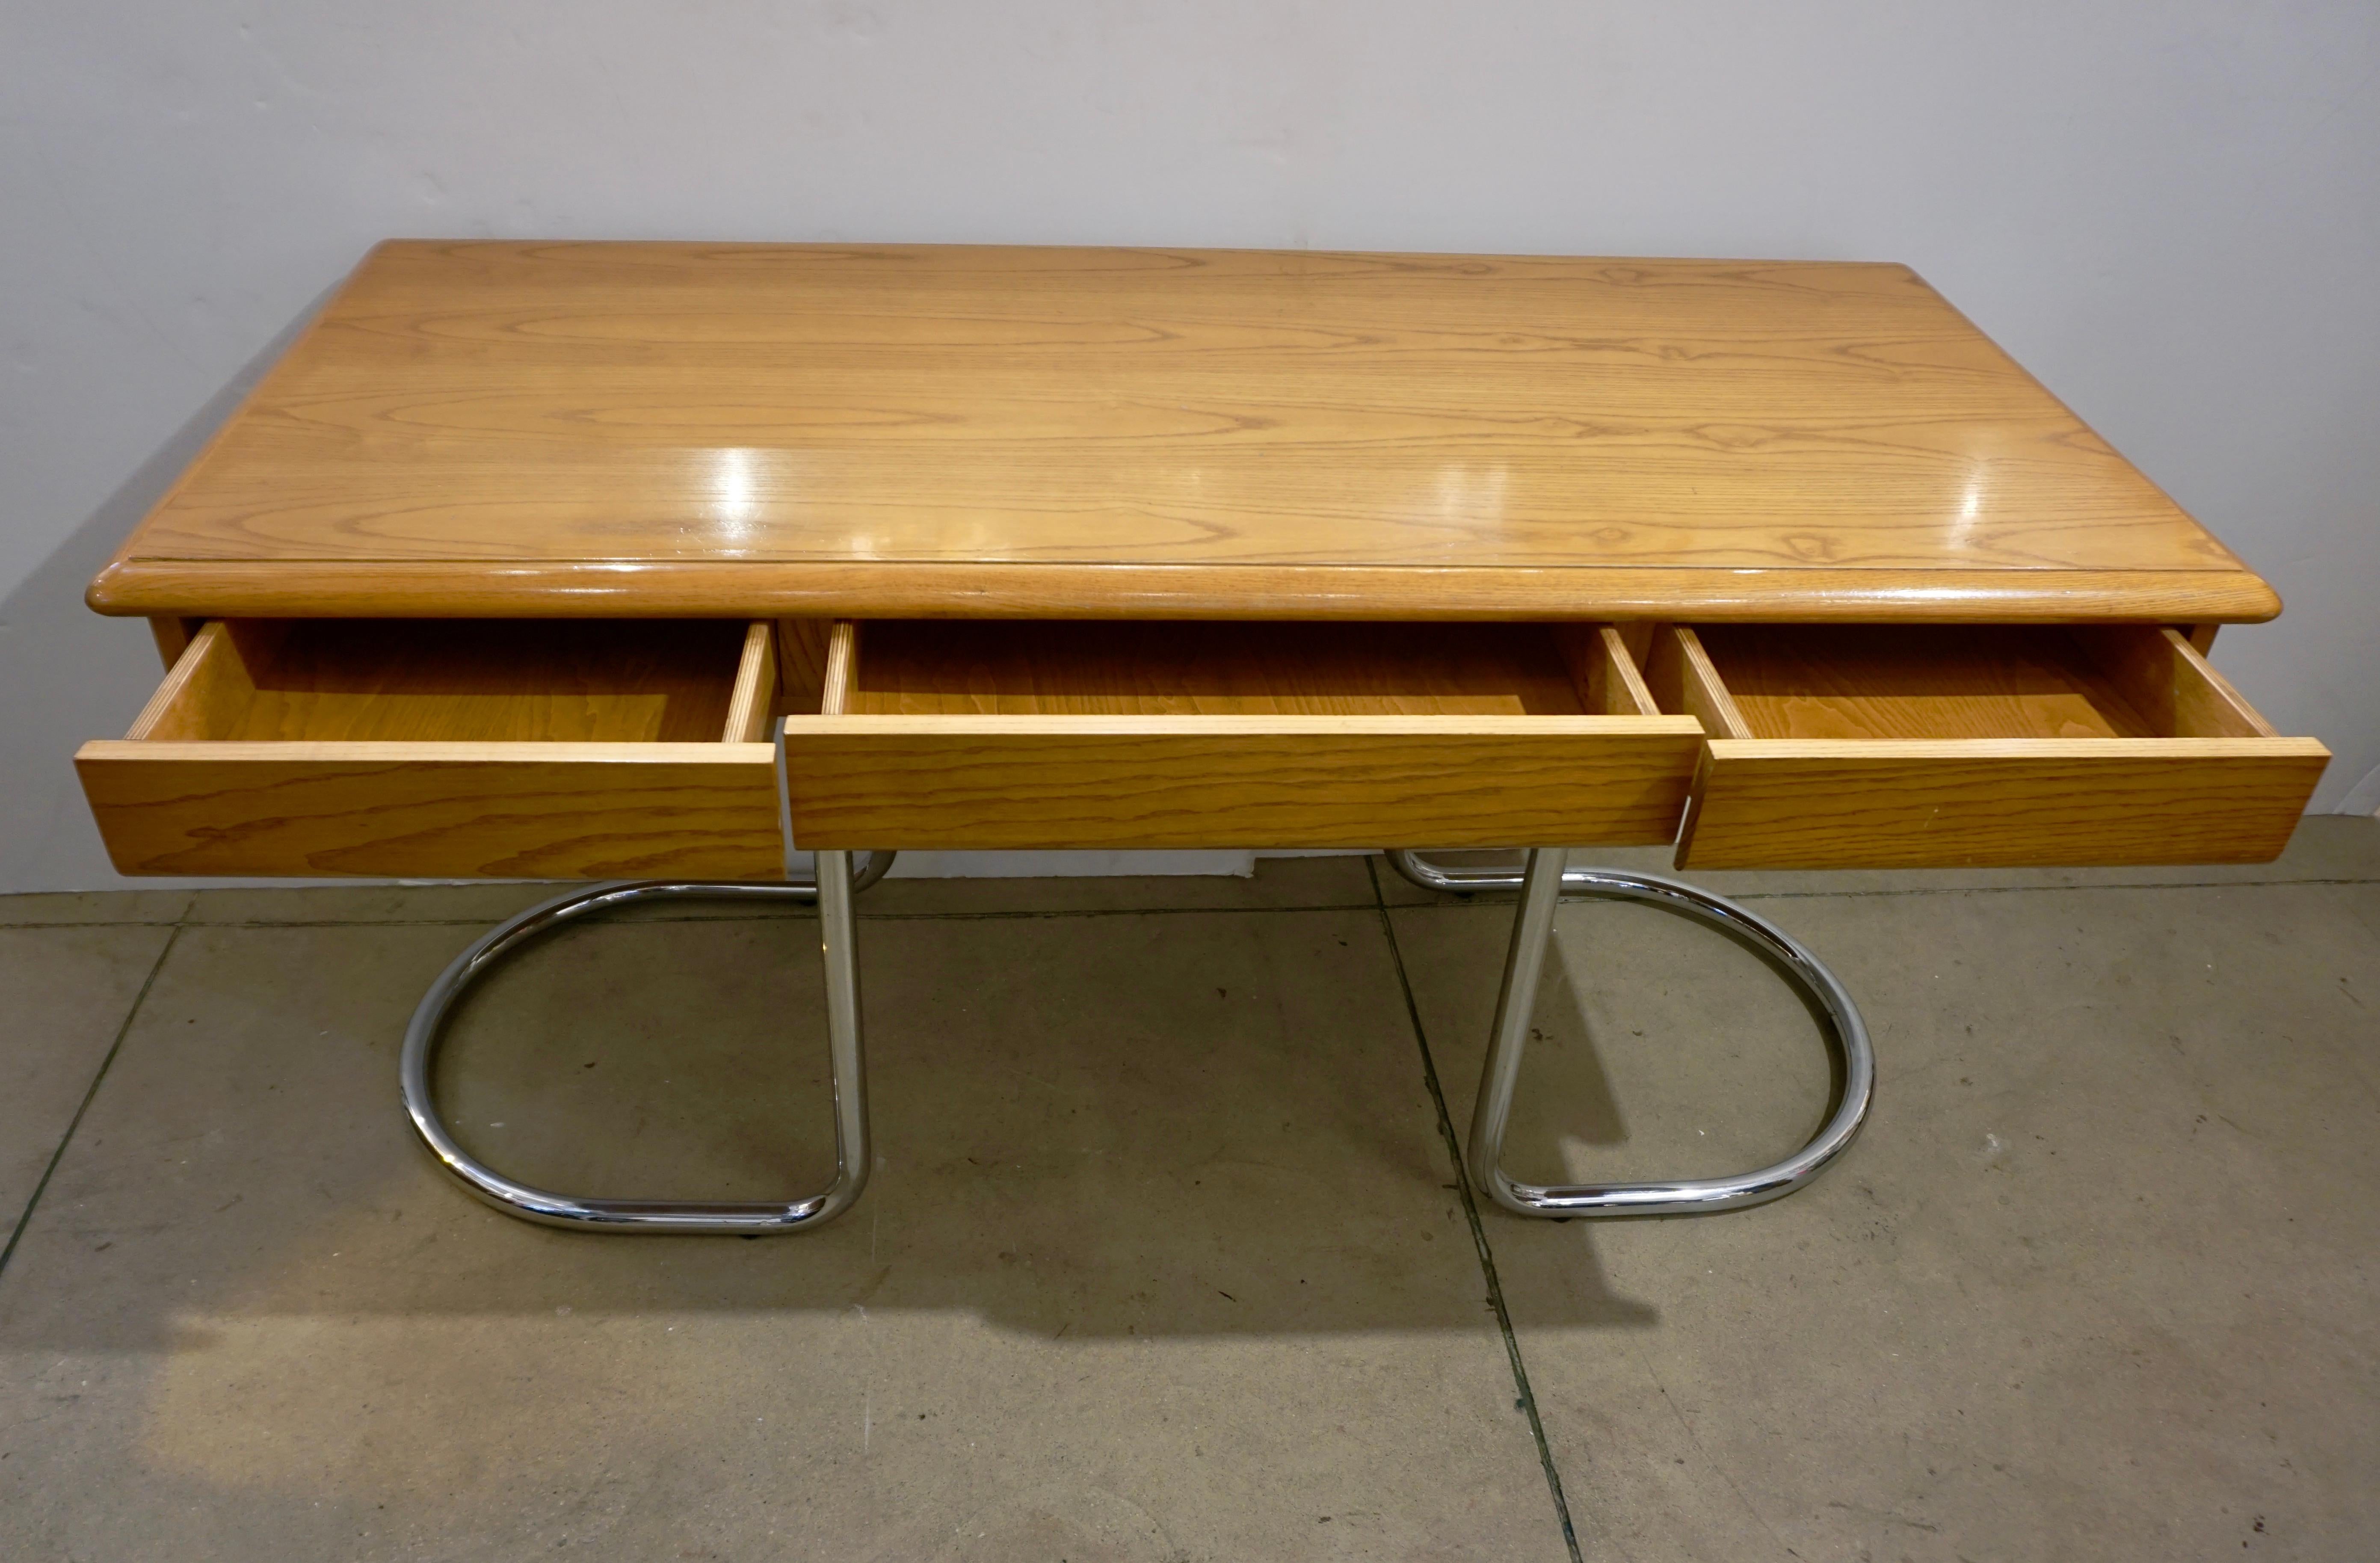 Hand-Crafted 1970s Italian Vintage Curved Nickel Legs 3-Drawer Ash Tree Center Desk/Console For Sale